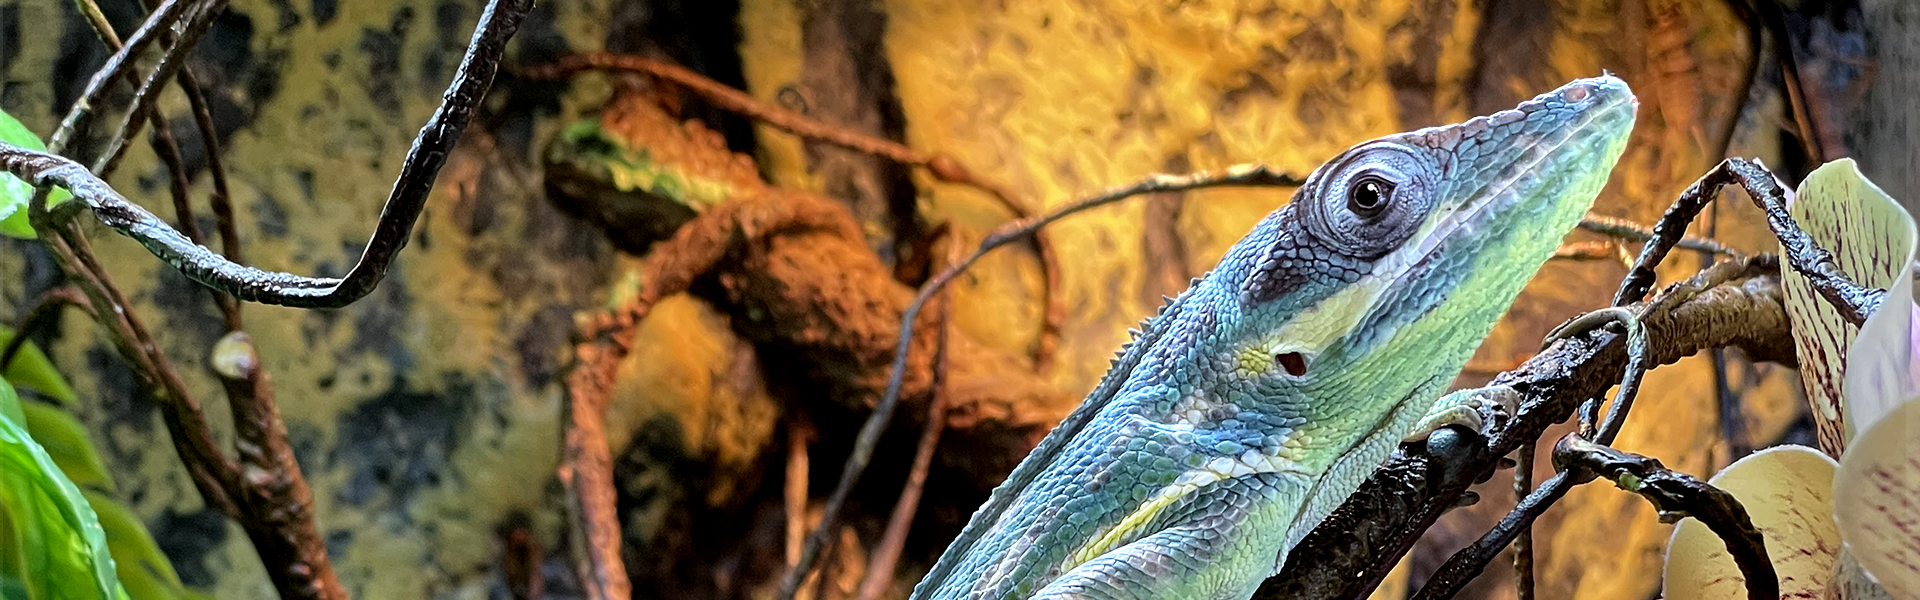 Giant Blue Beauty Anole Care Guide